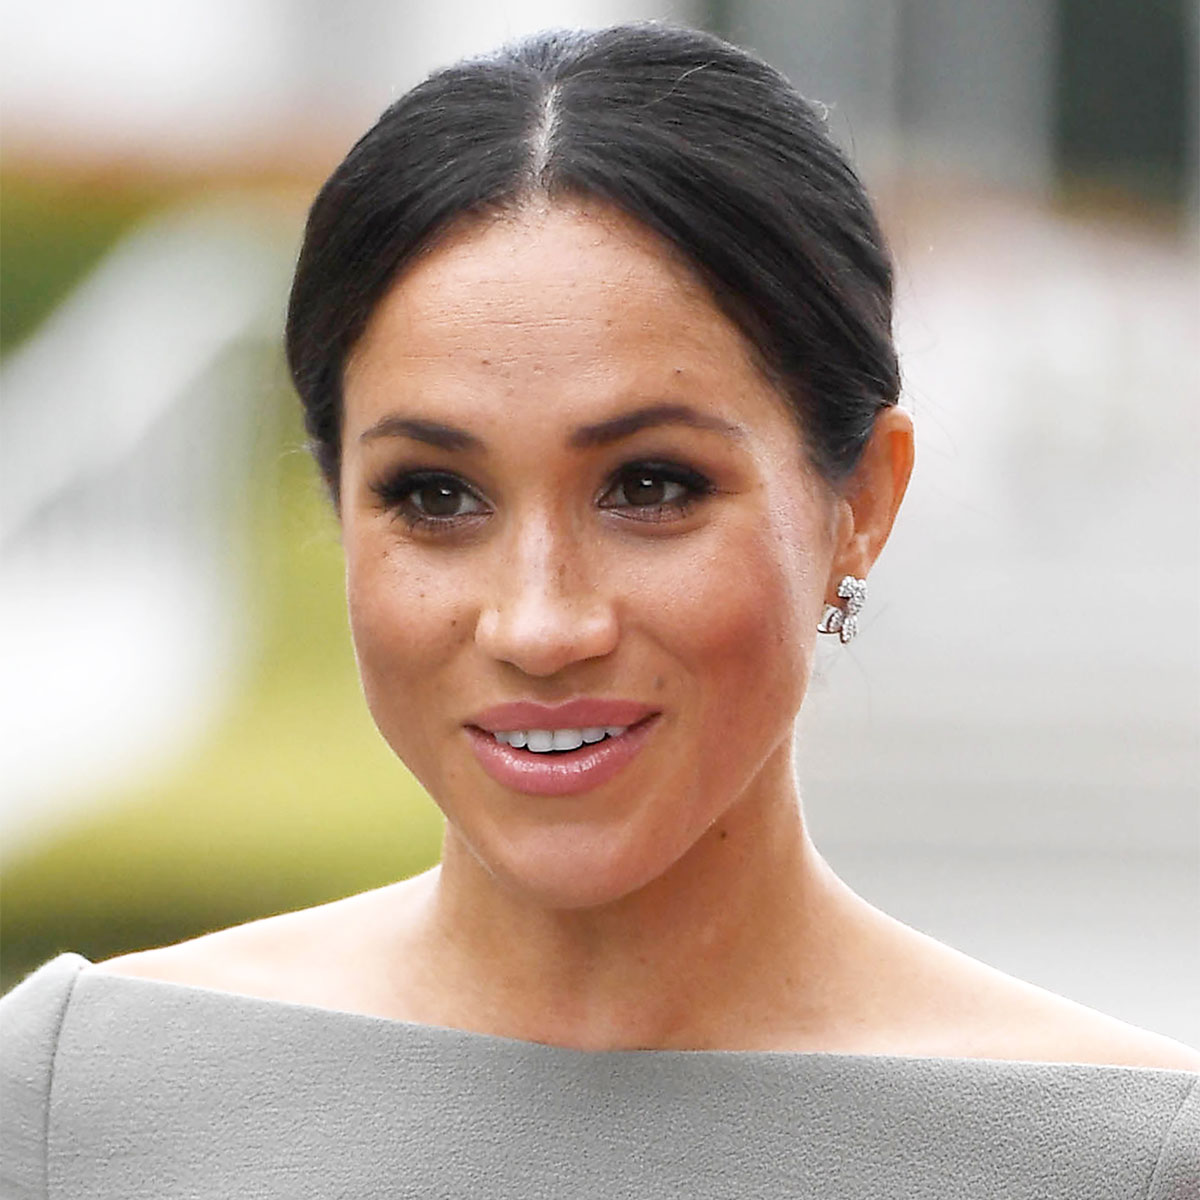 Meghan Markle's All-Black Outfit on International Women's Day